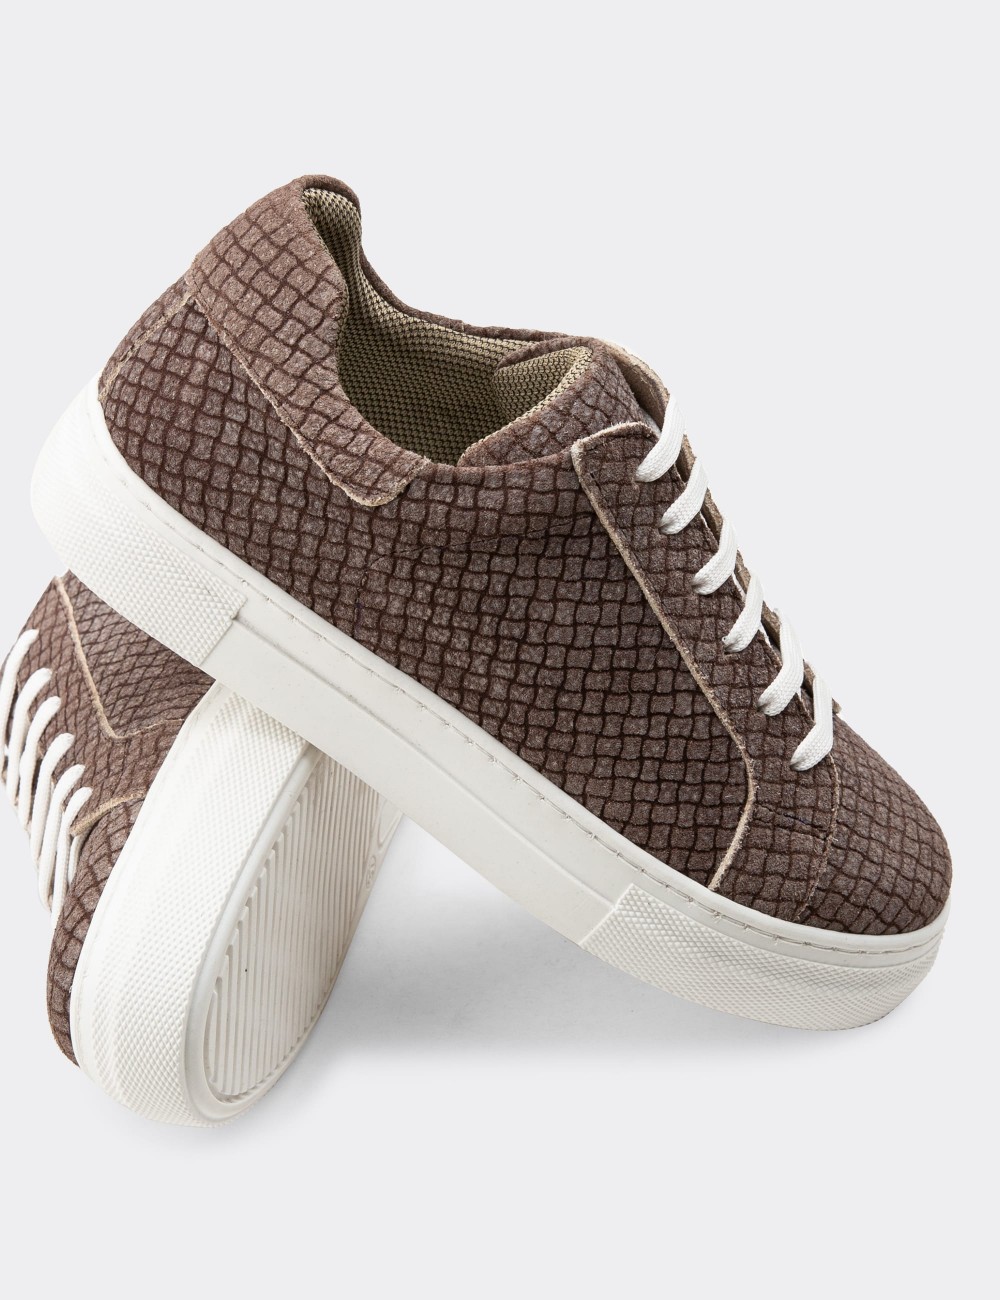 Sandstone Suede Leather Sneakers - Z1681ZVZNC03